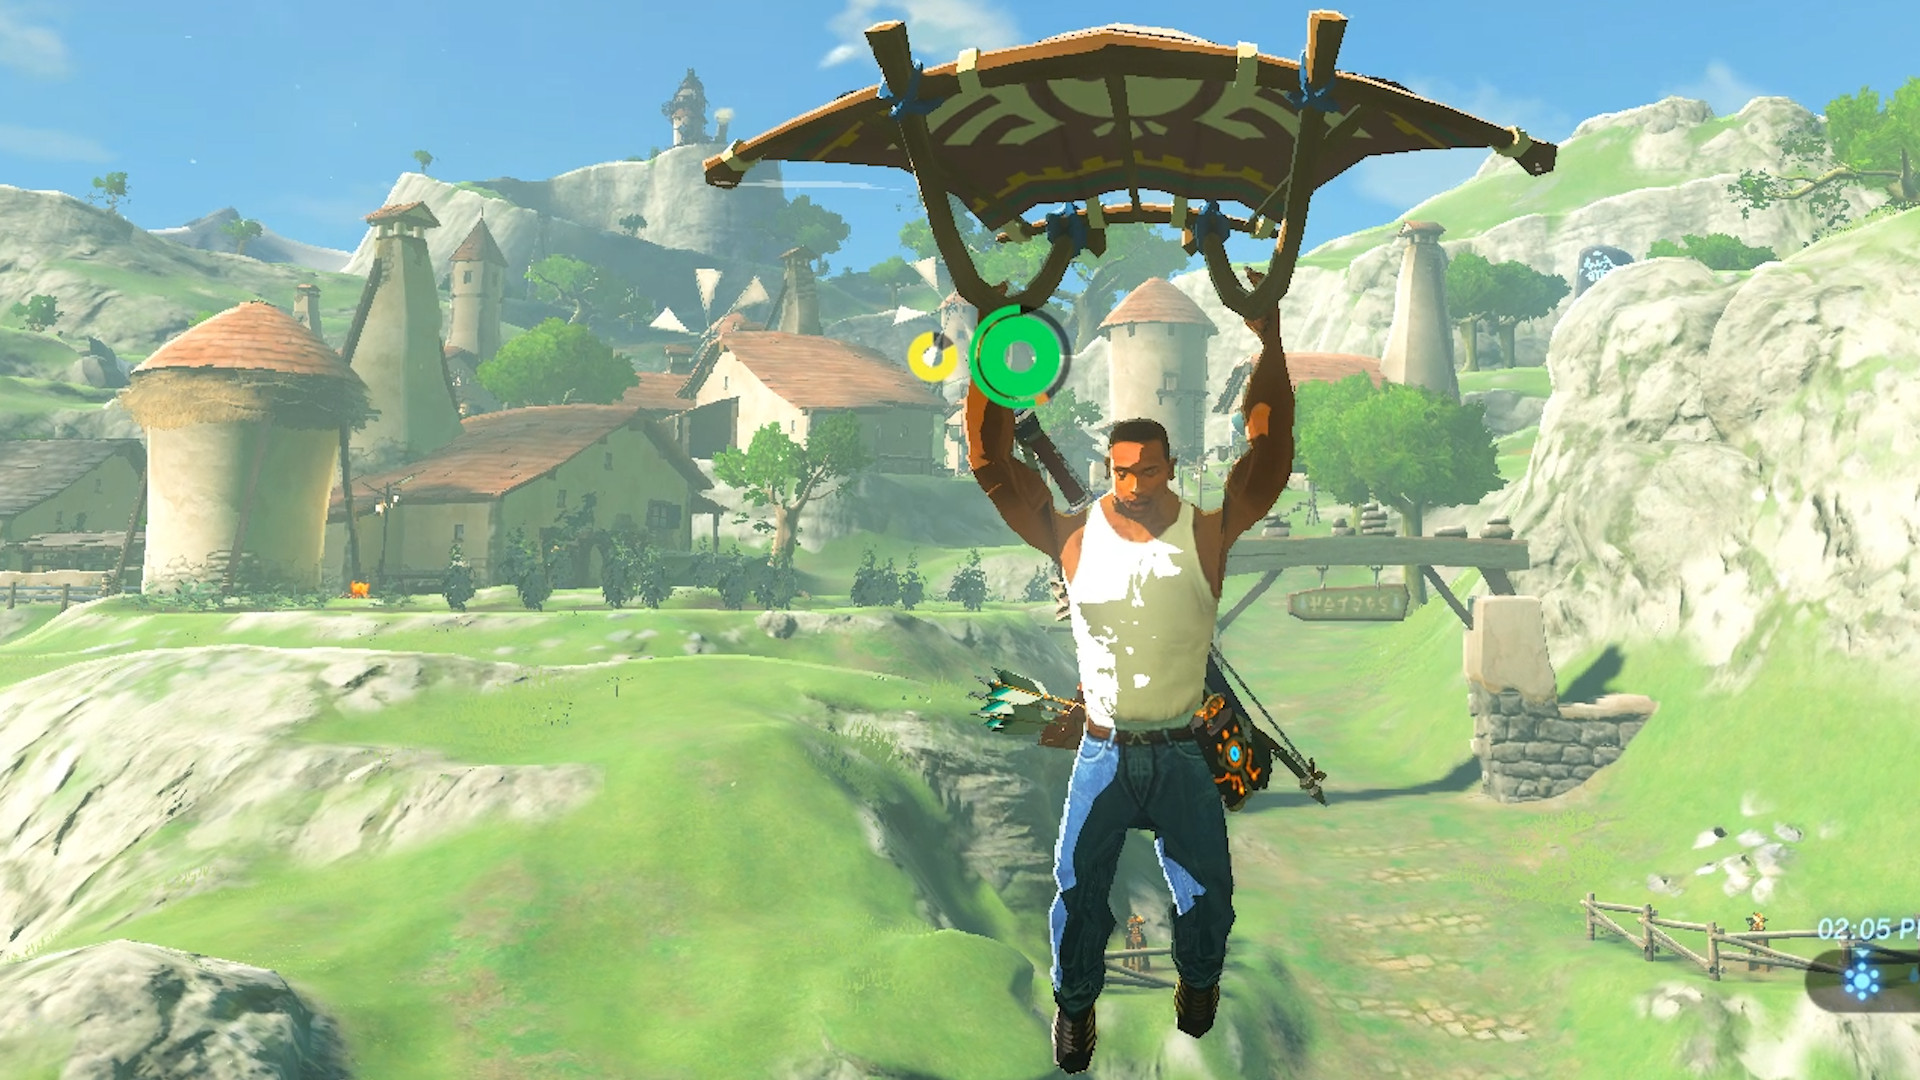 Modders Have Put Gta S Cj And The Witcher S Geralt Into Zelda Breath Of The Wild Pc Gamer